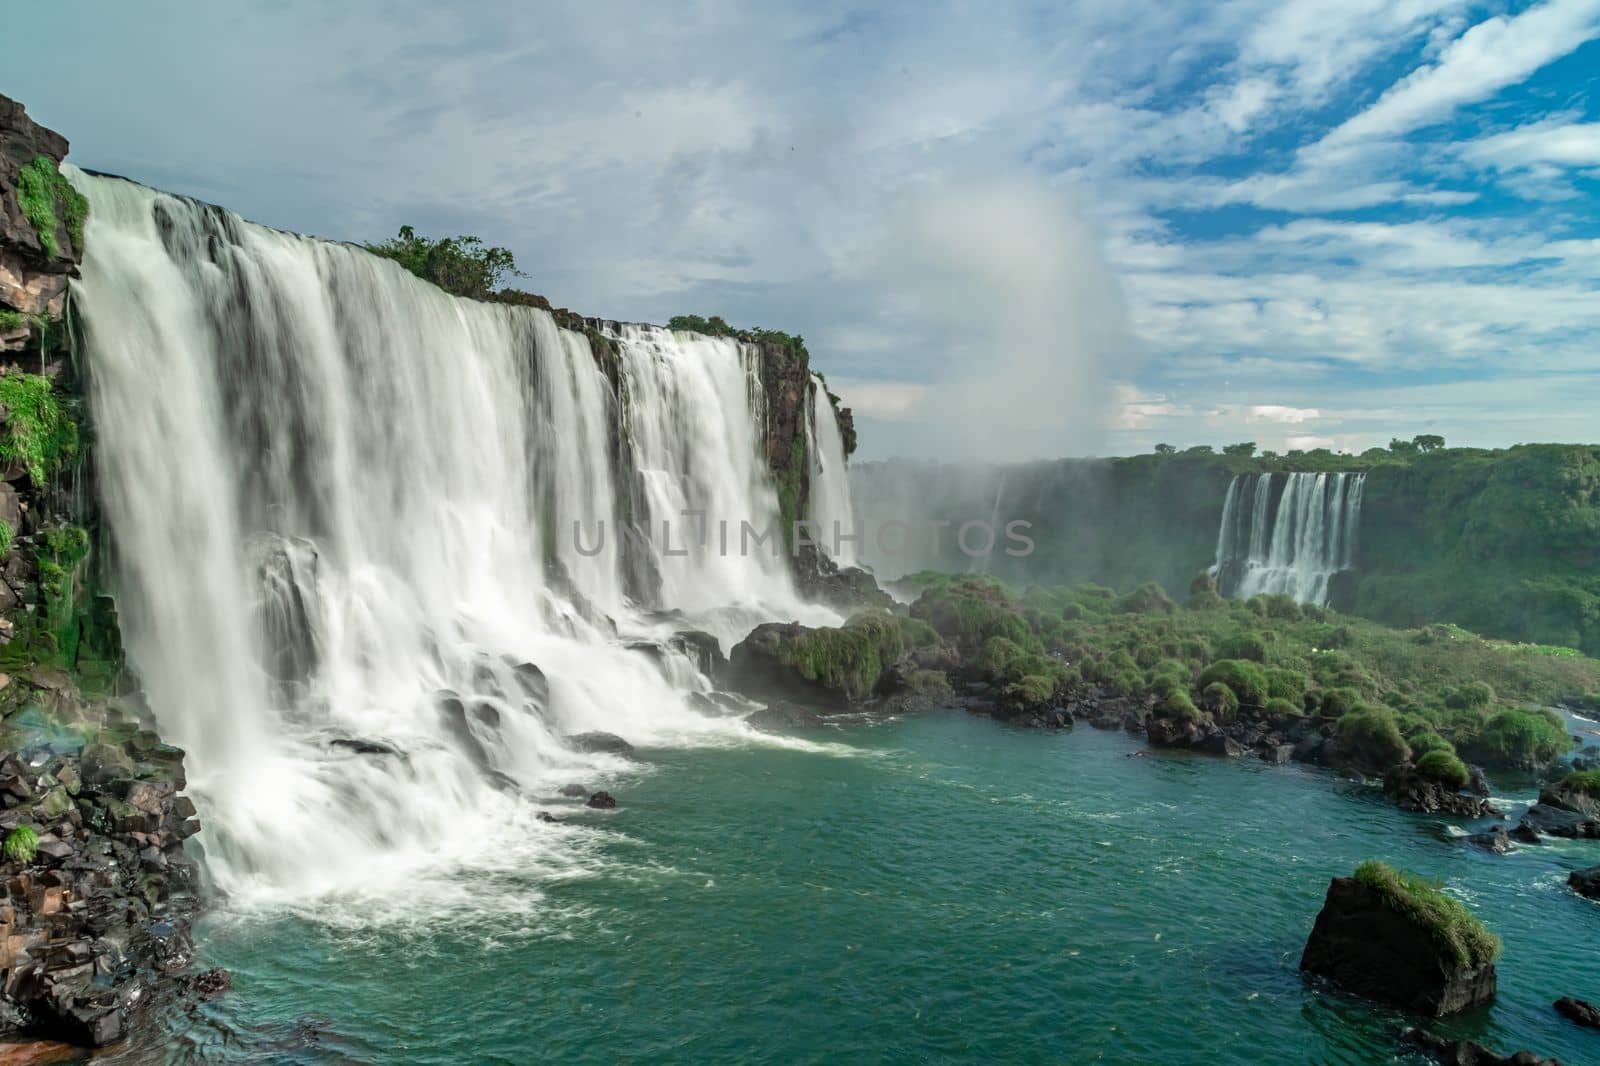 Iguazu Falls on the border of Brazil and Argentina in South America by Edophoto